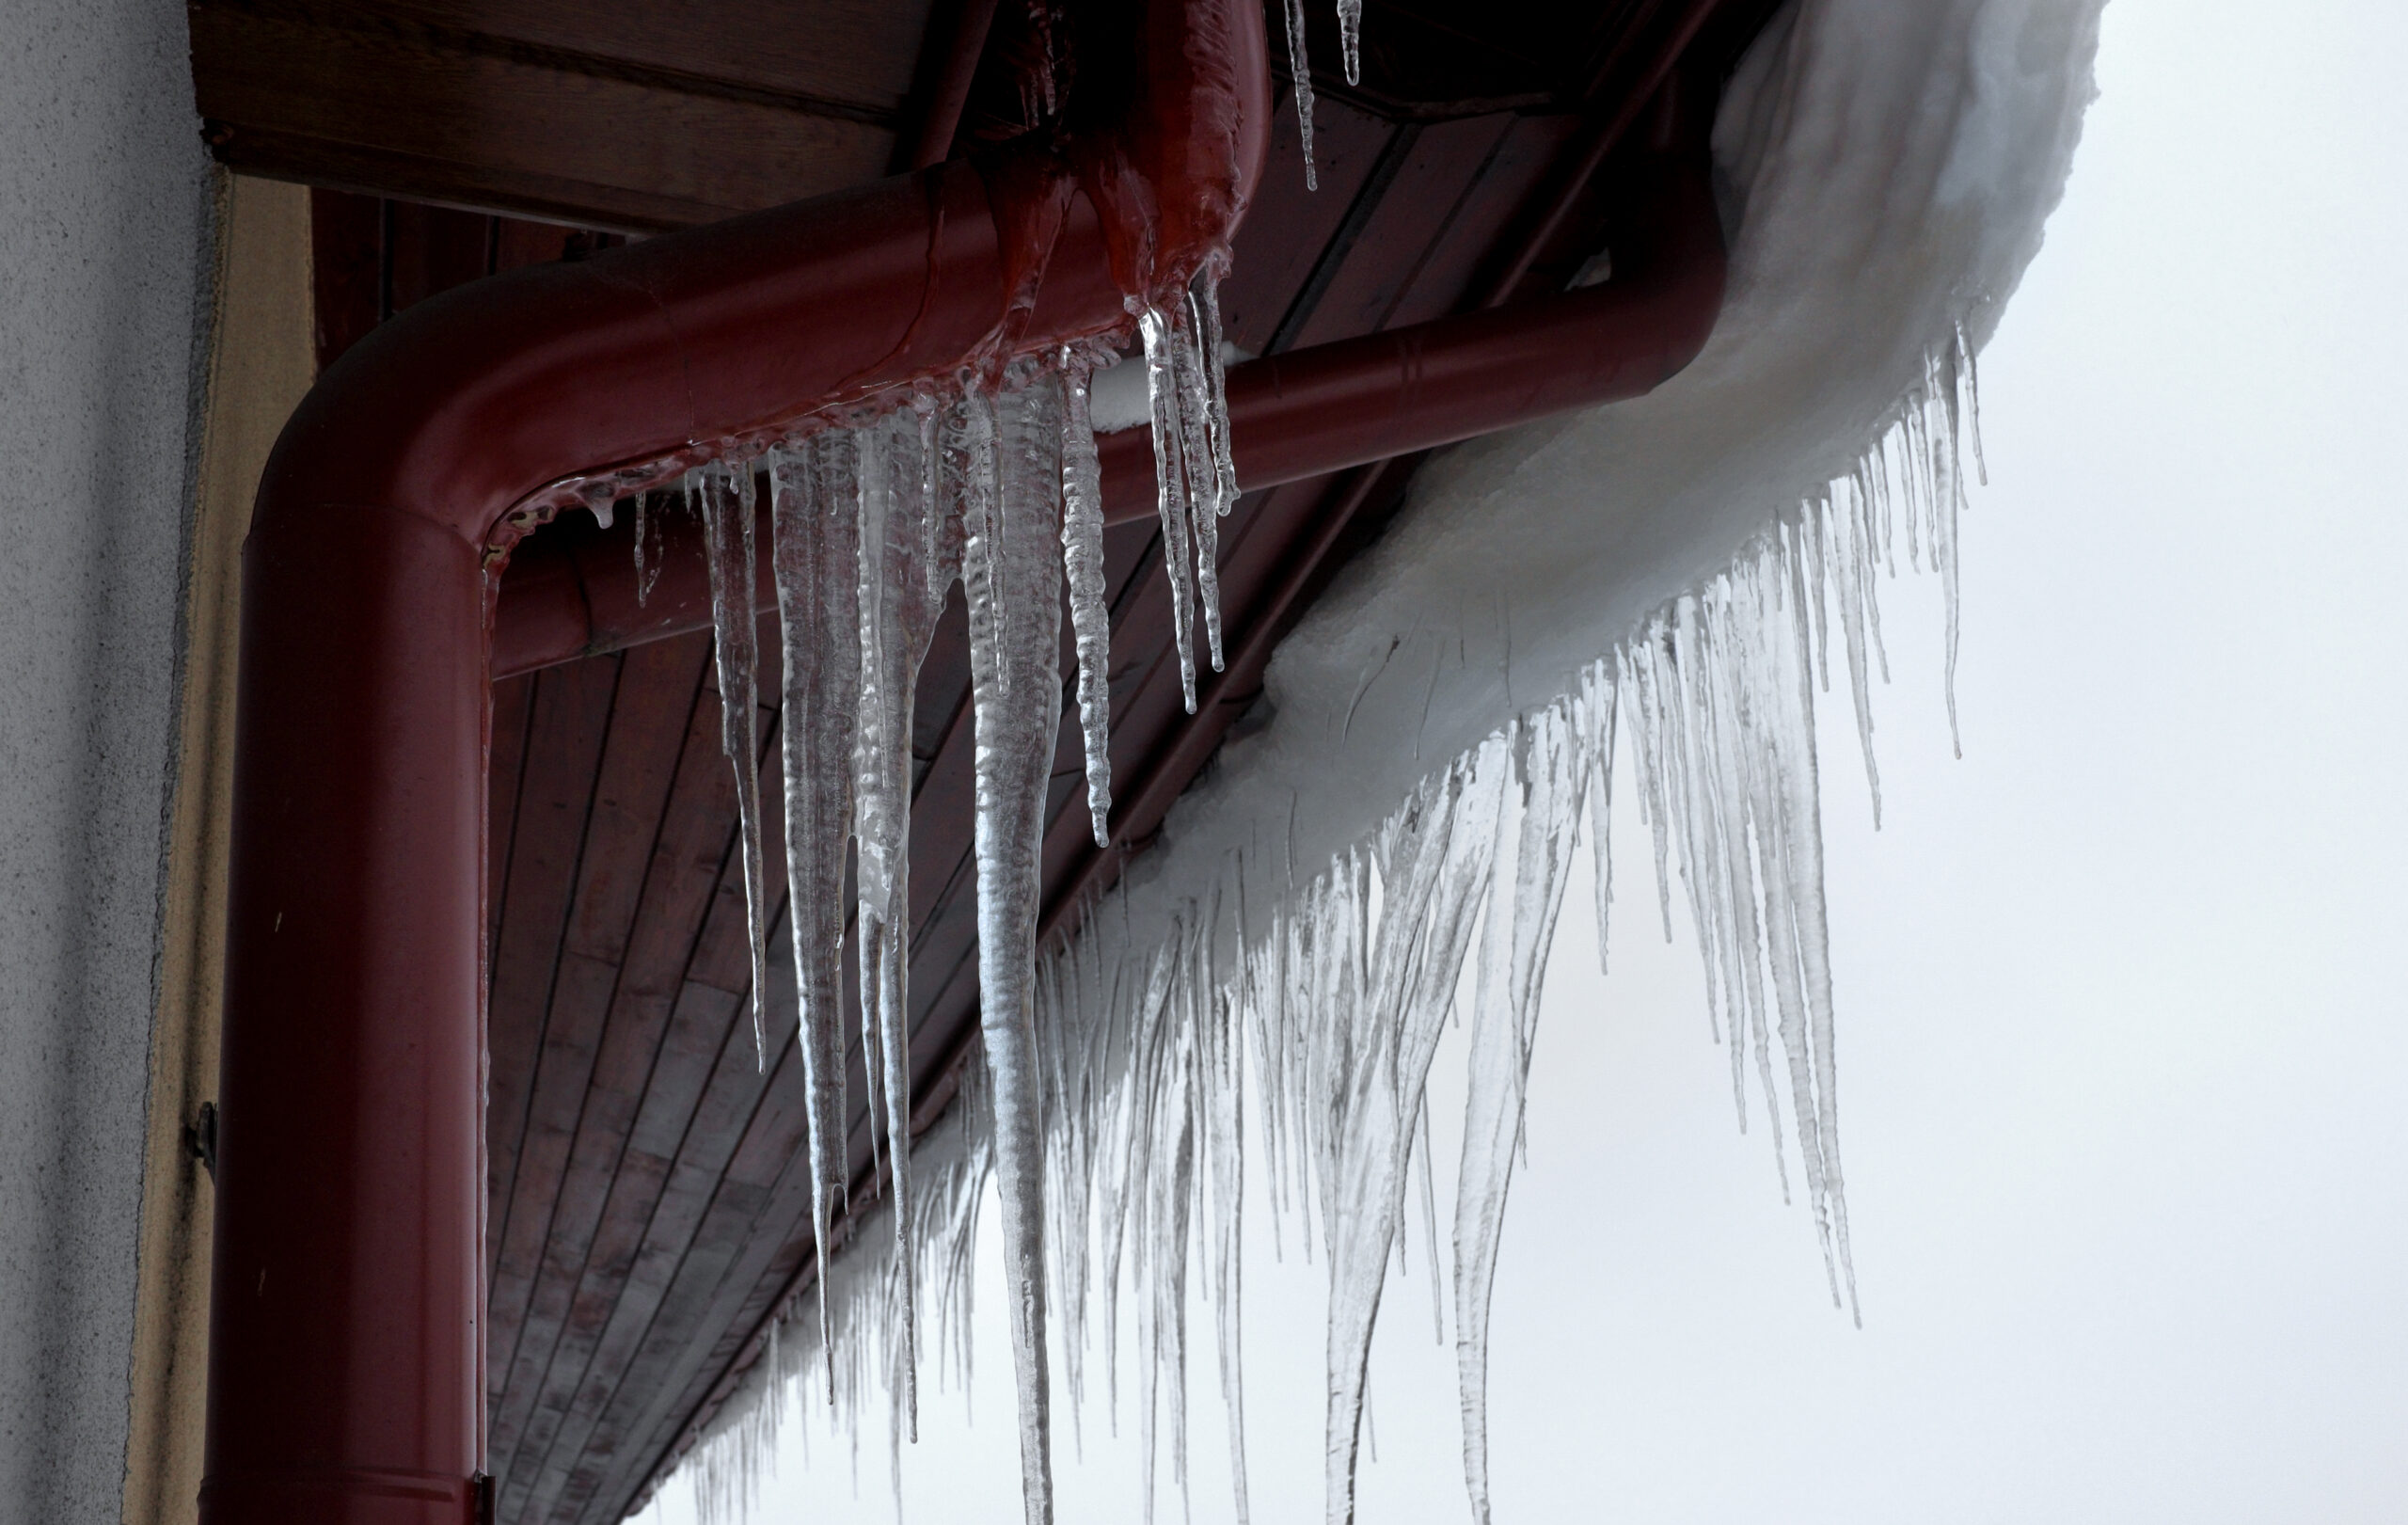 Ice Dams: Protecting Your Plumbing And How To Prevent Them